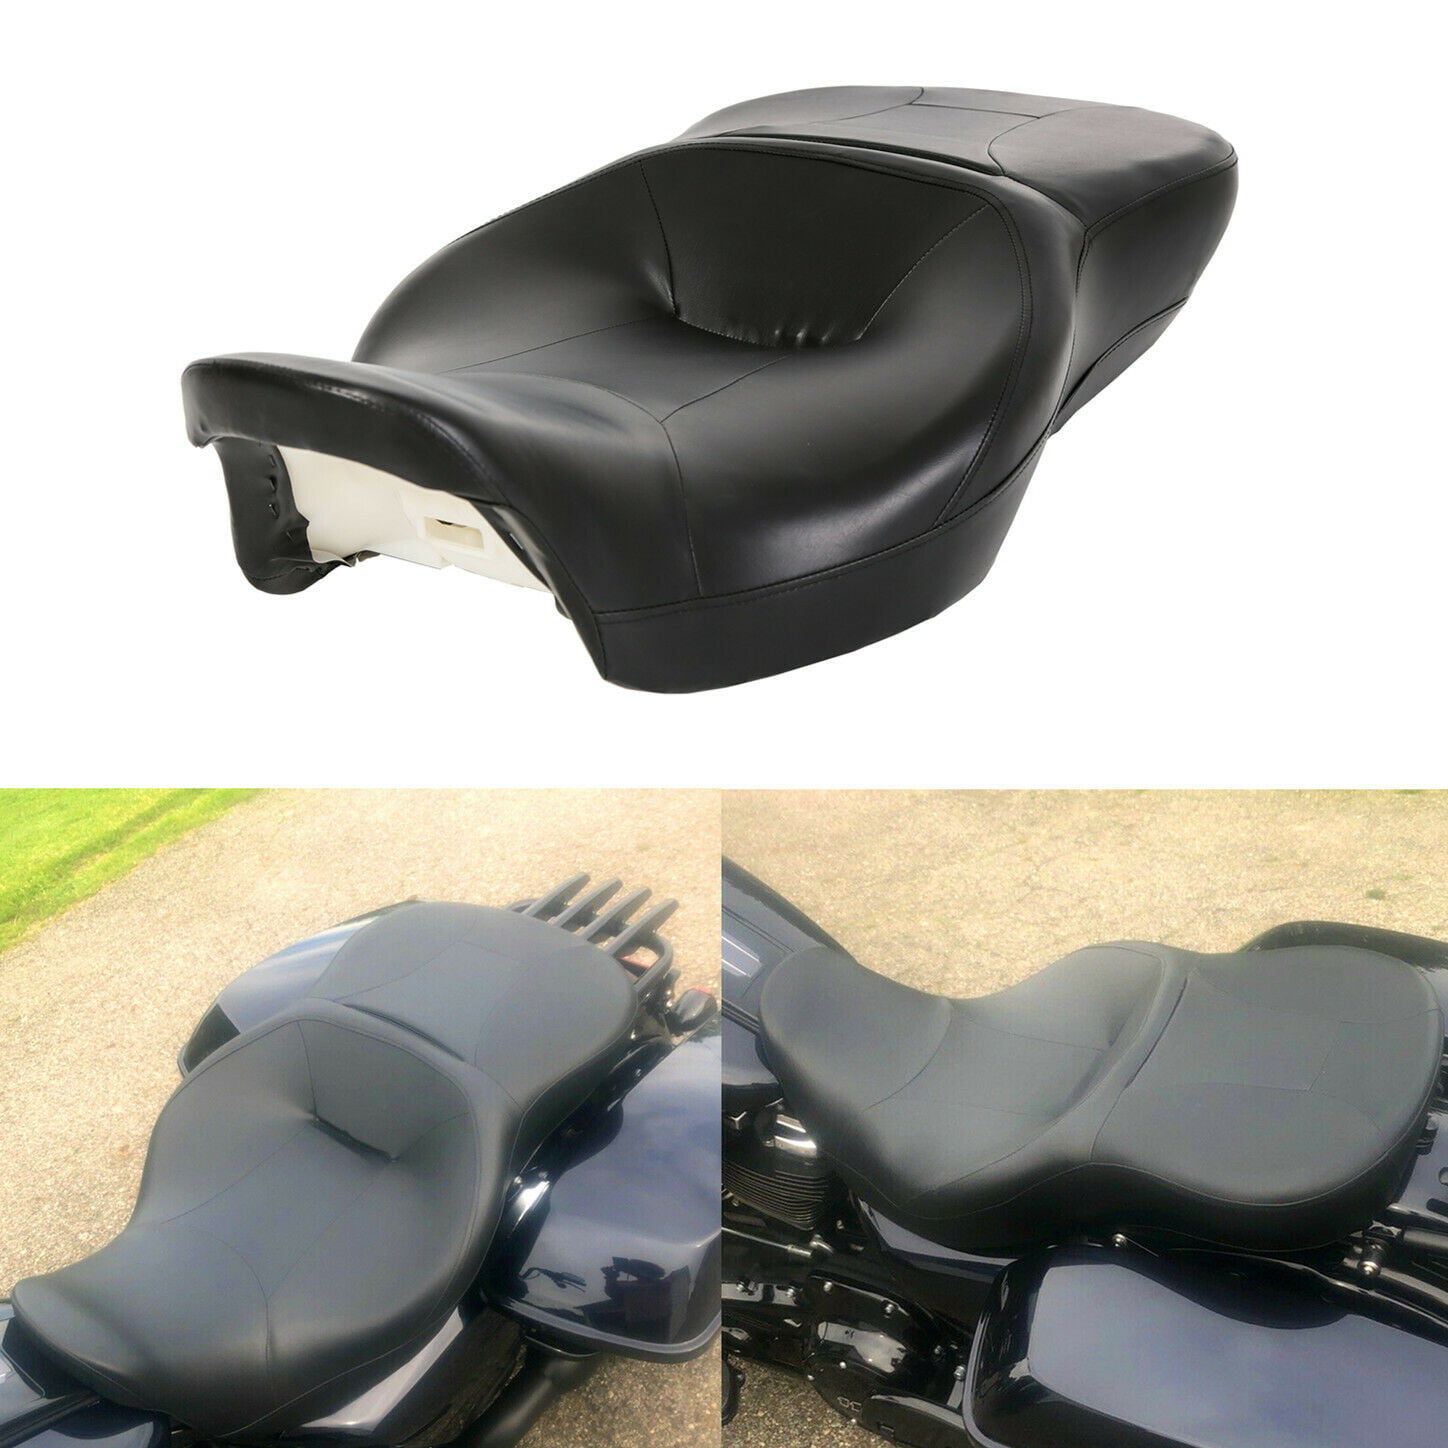 Tengchang New Hammock Rider and Passenger Seat Fit for Harley Touring FLHR FLHX FLTRX 14-17